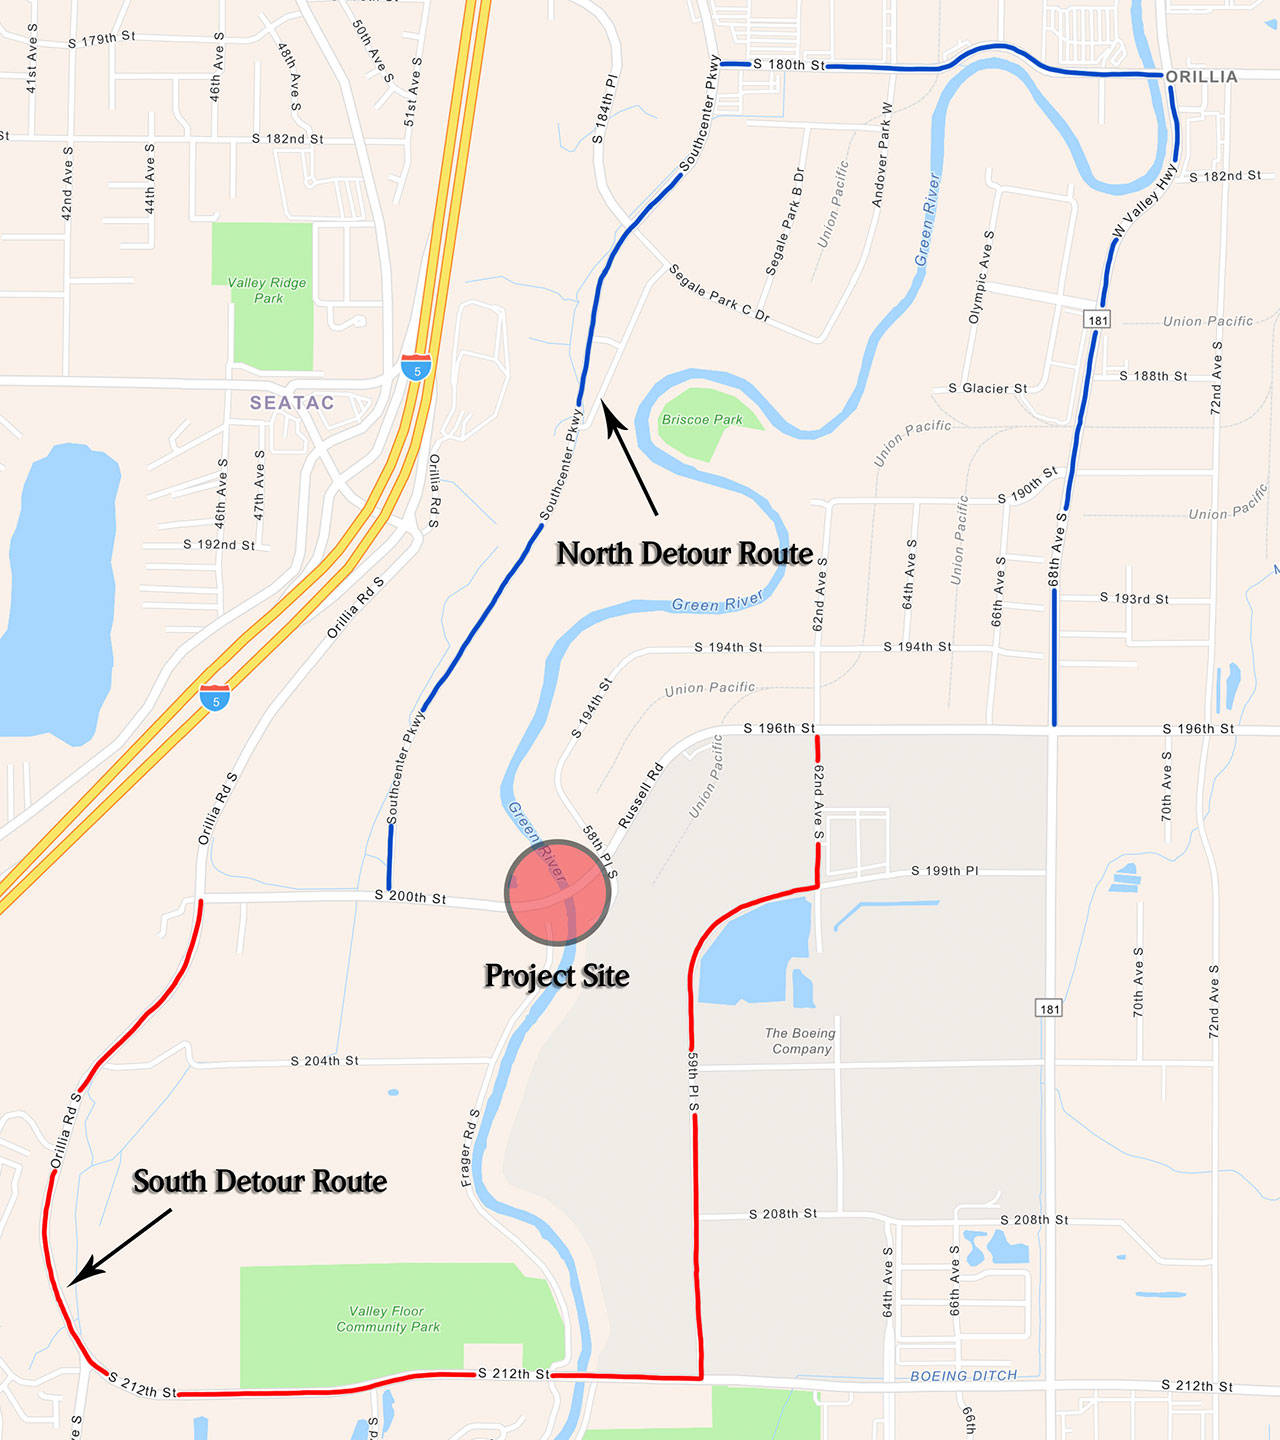 Drivers will need to take alternate routes during bridge construction along South 196th/200th Street on the Tukwila-Kent border just east of Orilla Road. COURTESY GRAPHIC, City of Tukwila